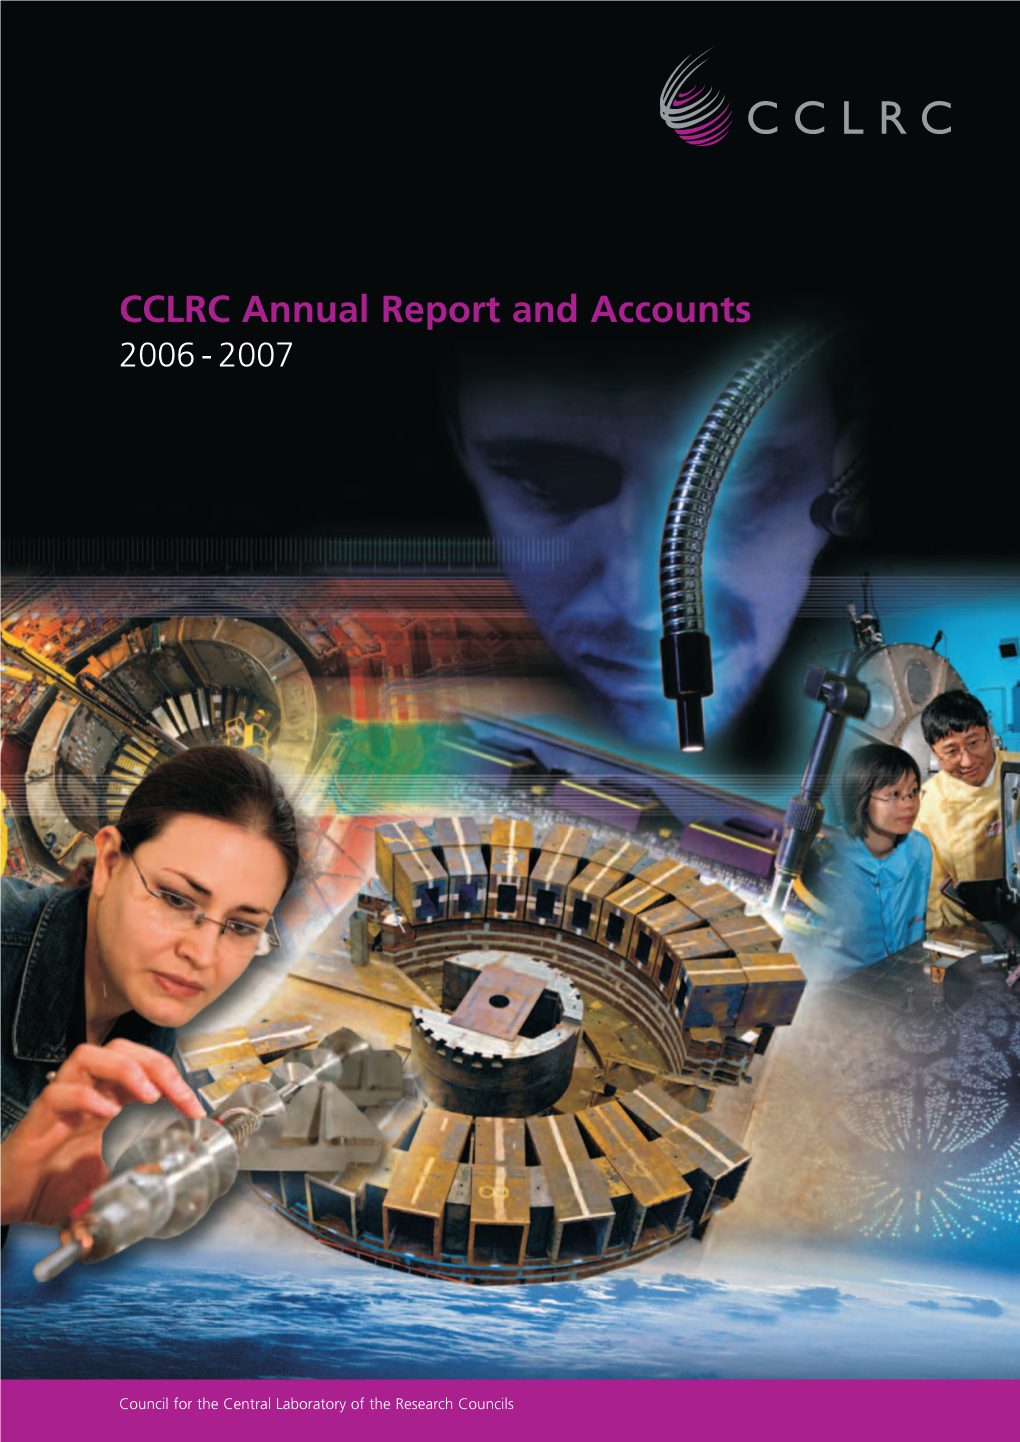 Cclrc Annual Report and Accounts 2006-2007 Hc